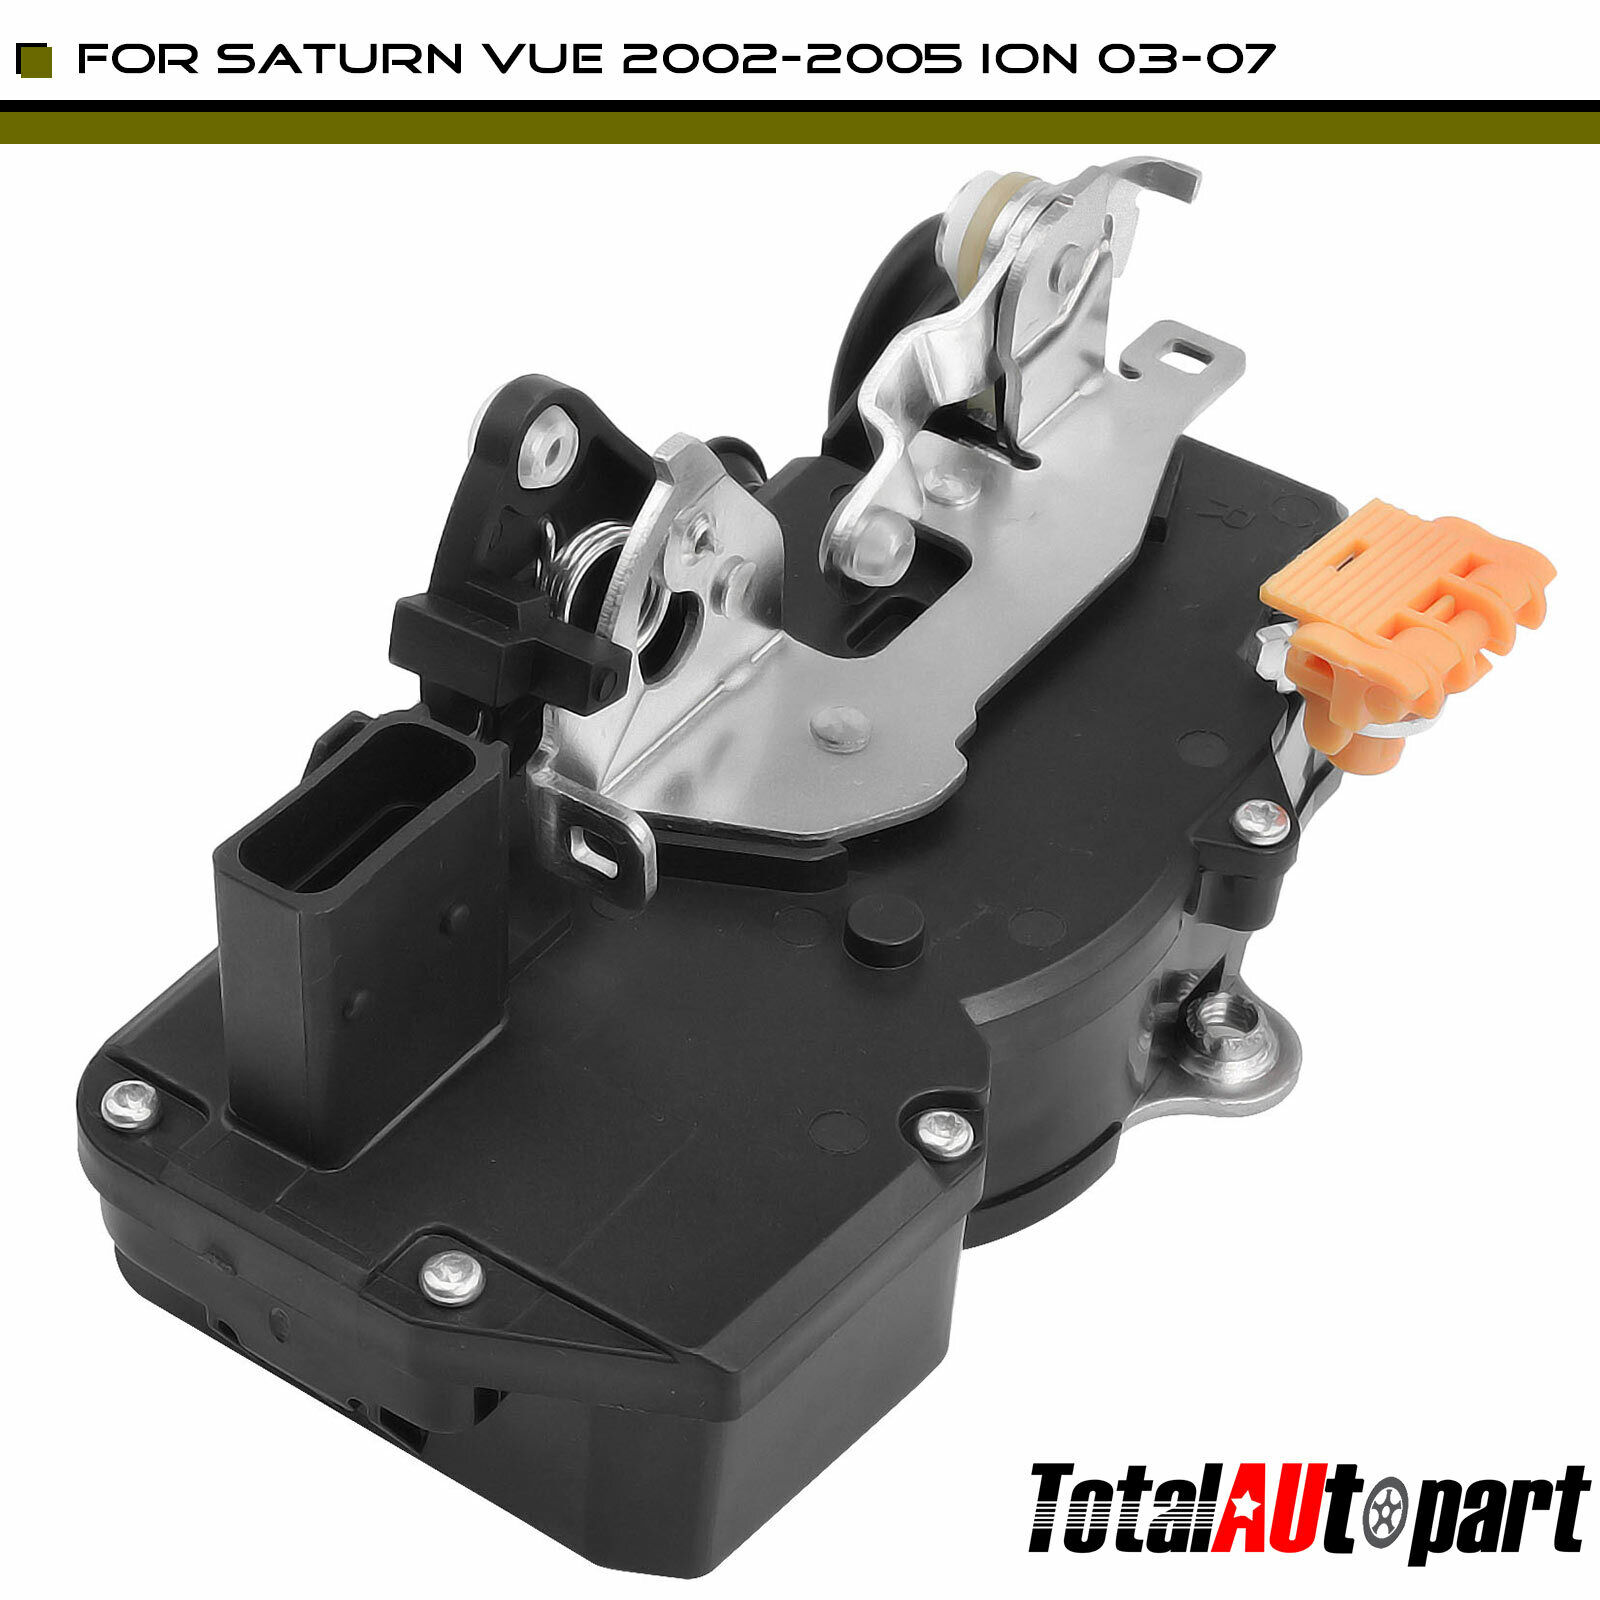 Garage-Pro Rear Door Lock Actuator Compatible with 2002-2005 Saturn Vue and 2003-2007 Saturn Ion Integrated Passenger Side 